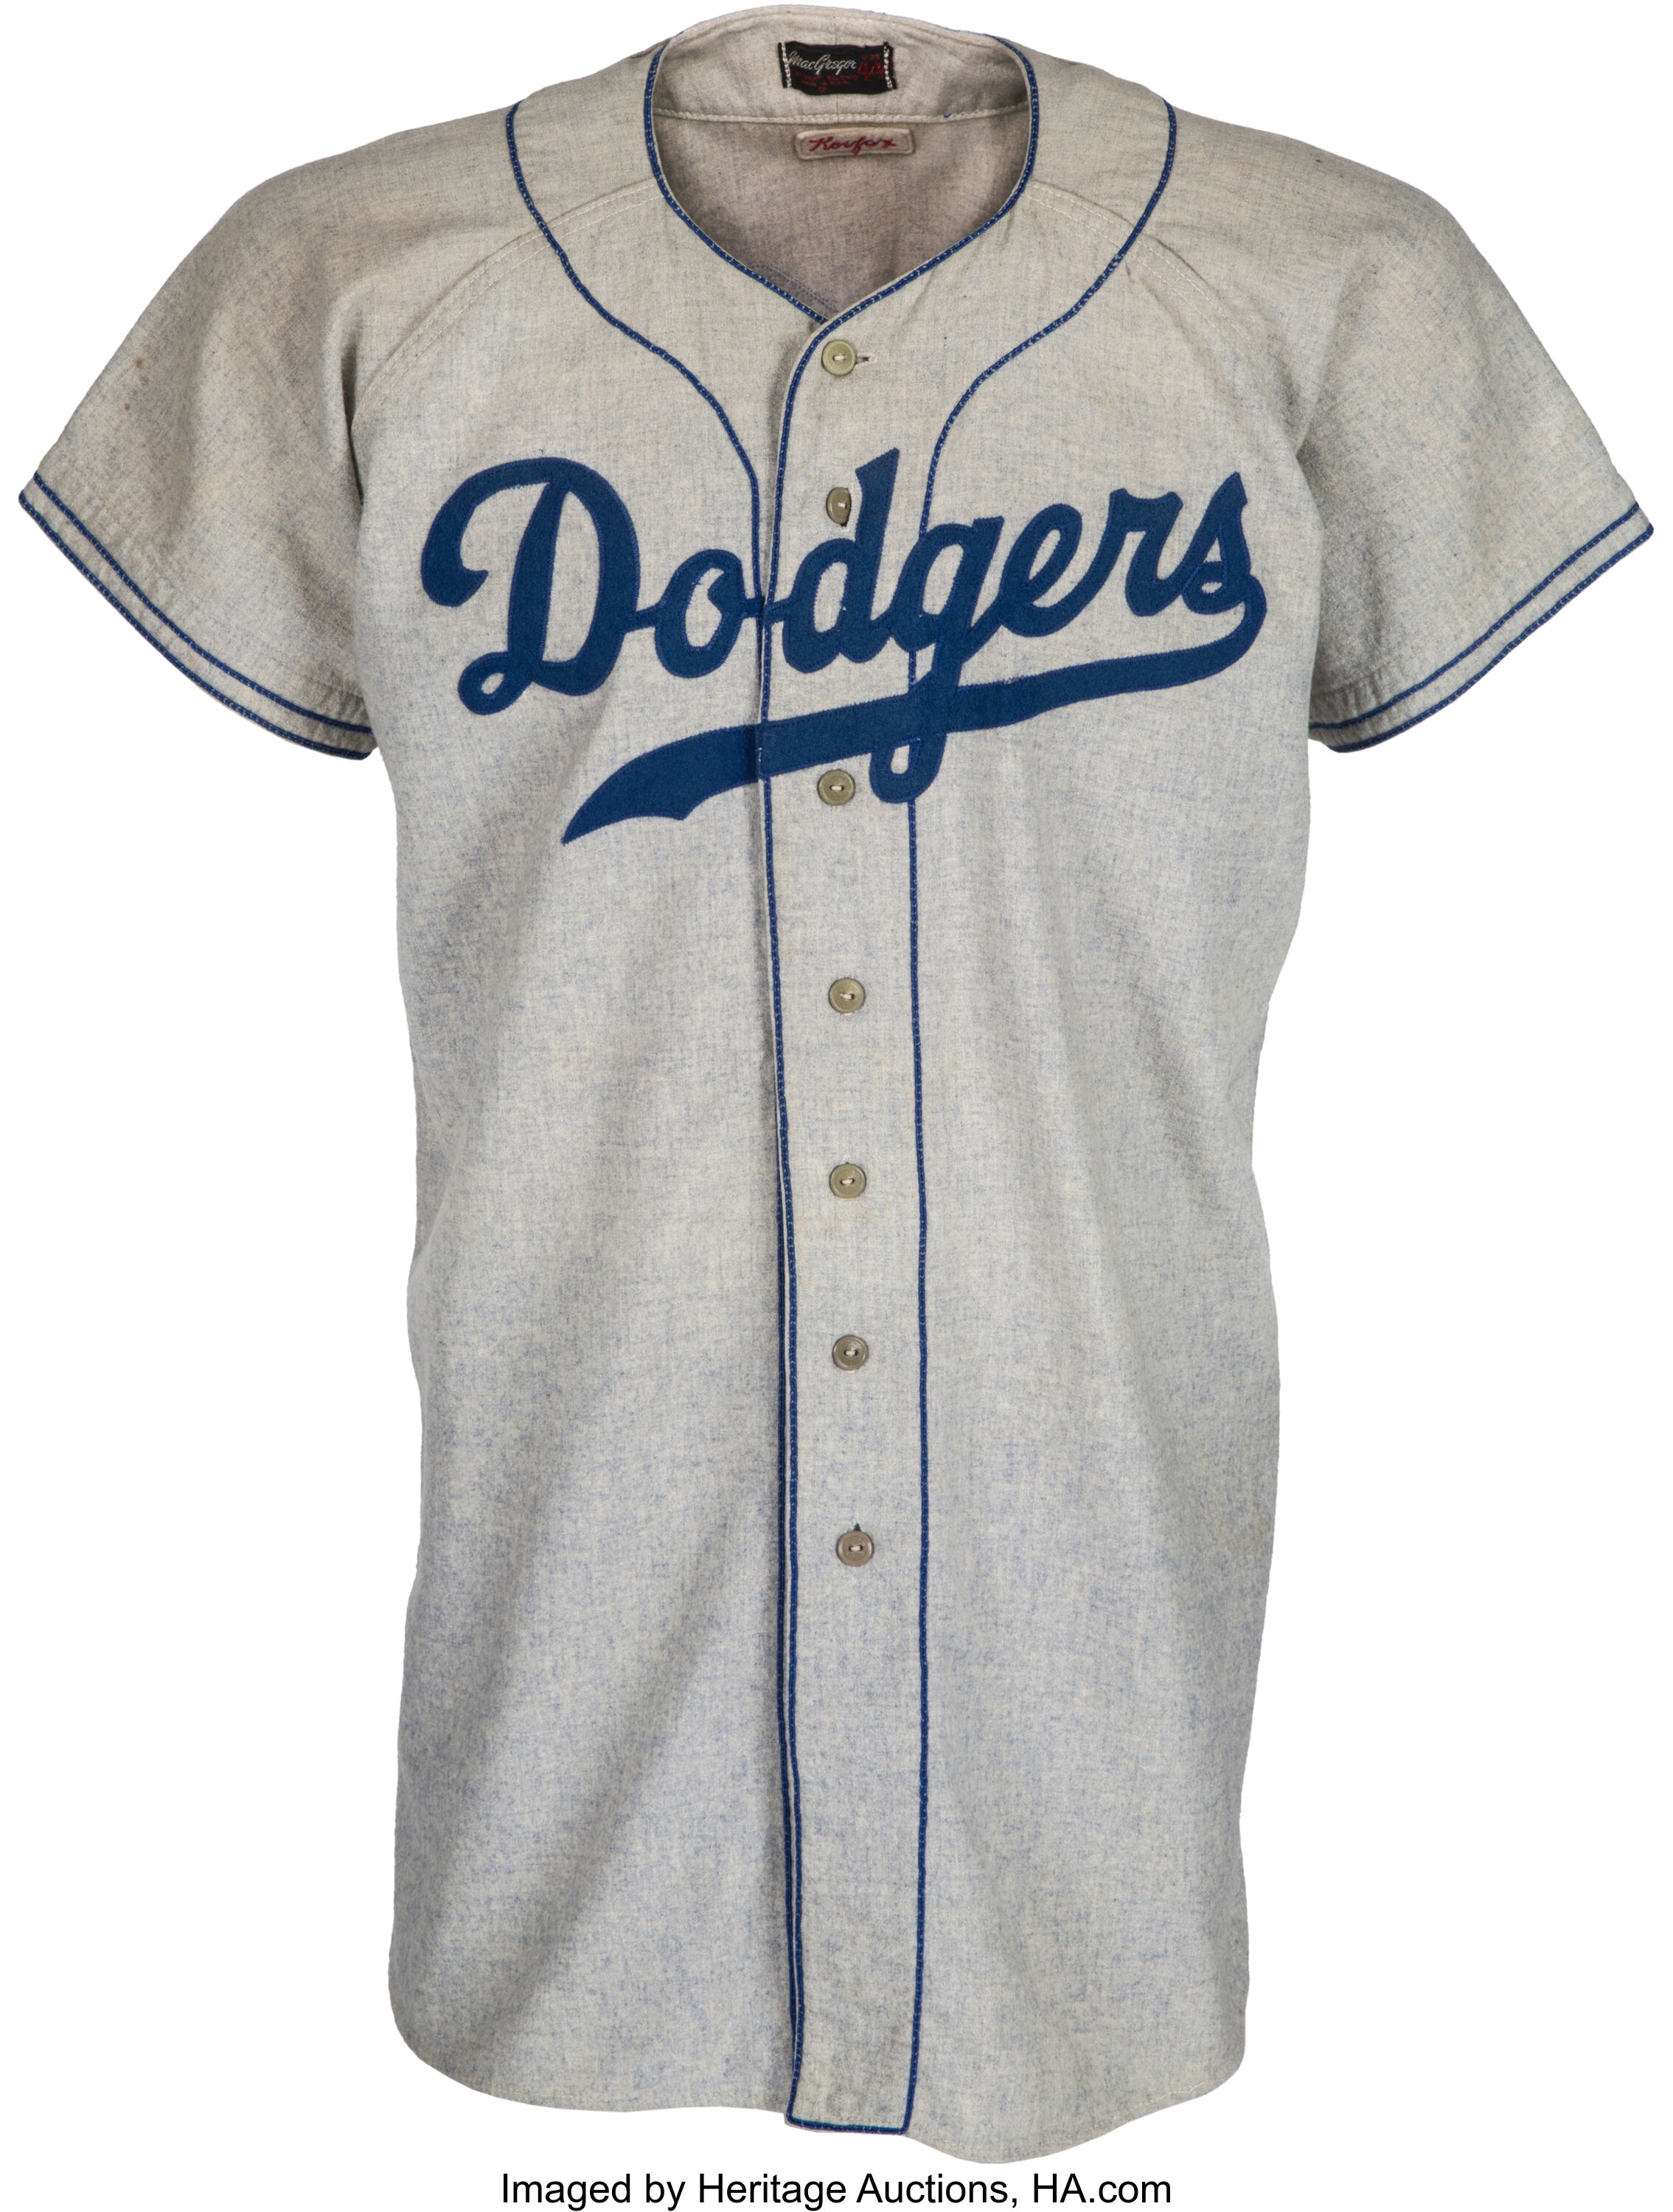 The Brooklyn Dodgers in Jersey City – Society for American